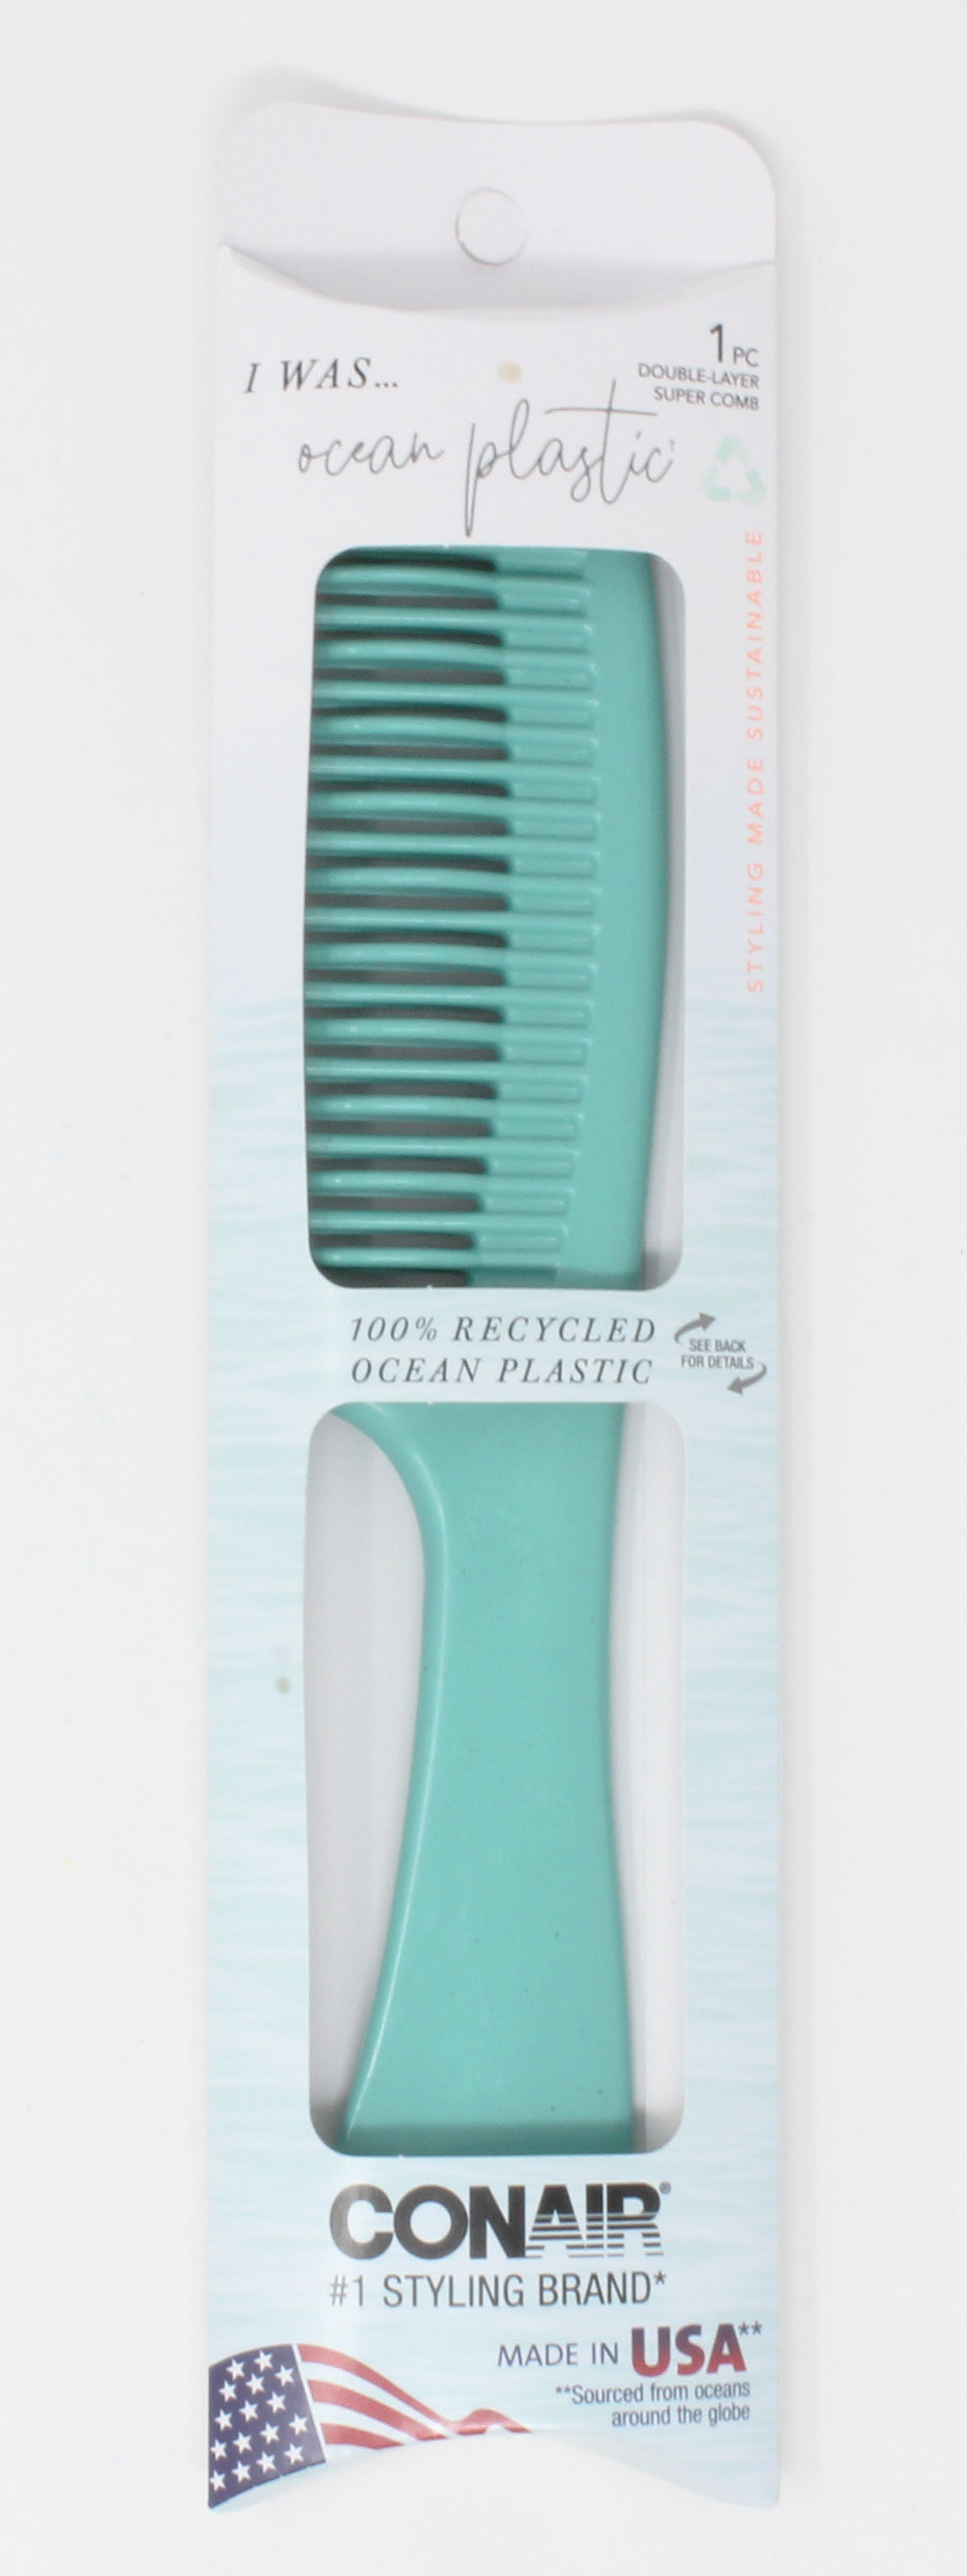 Conair styling brand comb